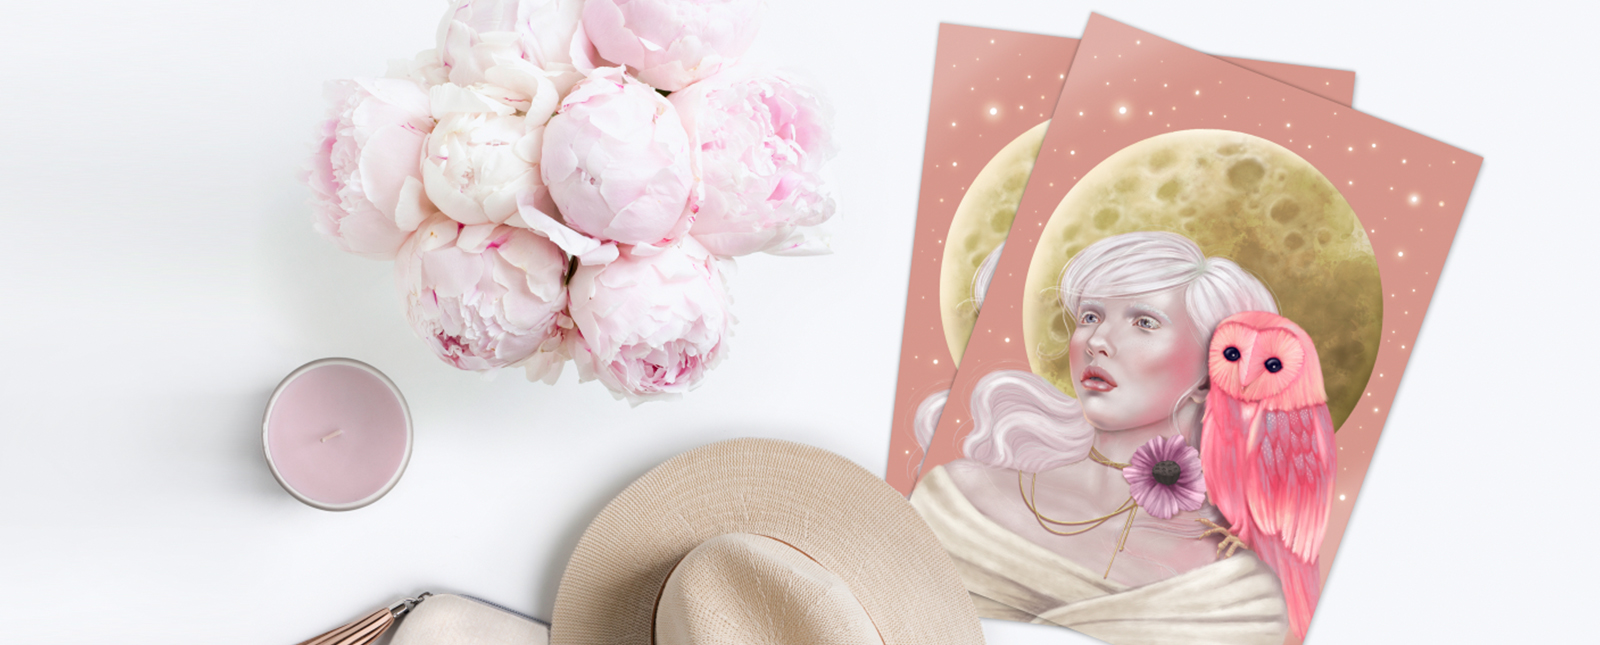 A tranquil workspace with a painting by Melanie Stimmell featuring illustrations of a woman and an owl against a moon backdrop, surrounded by peonies, a candle, and a straw hat on a white